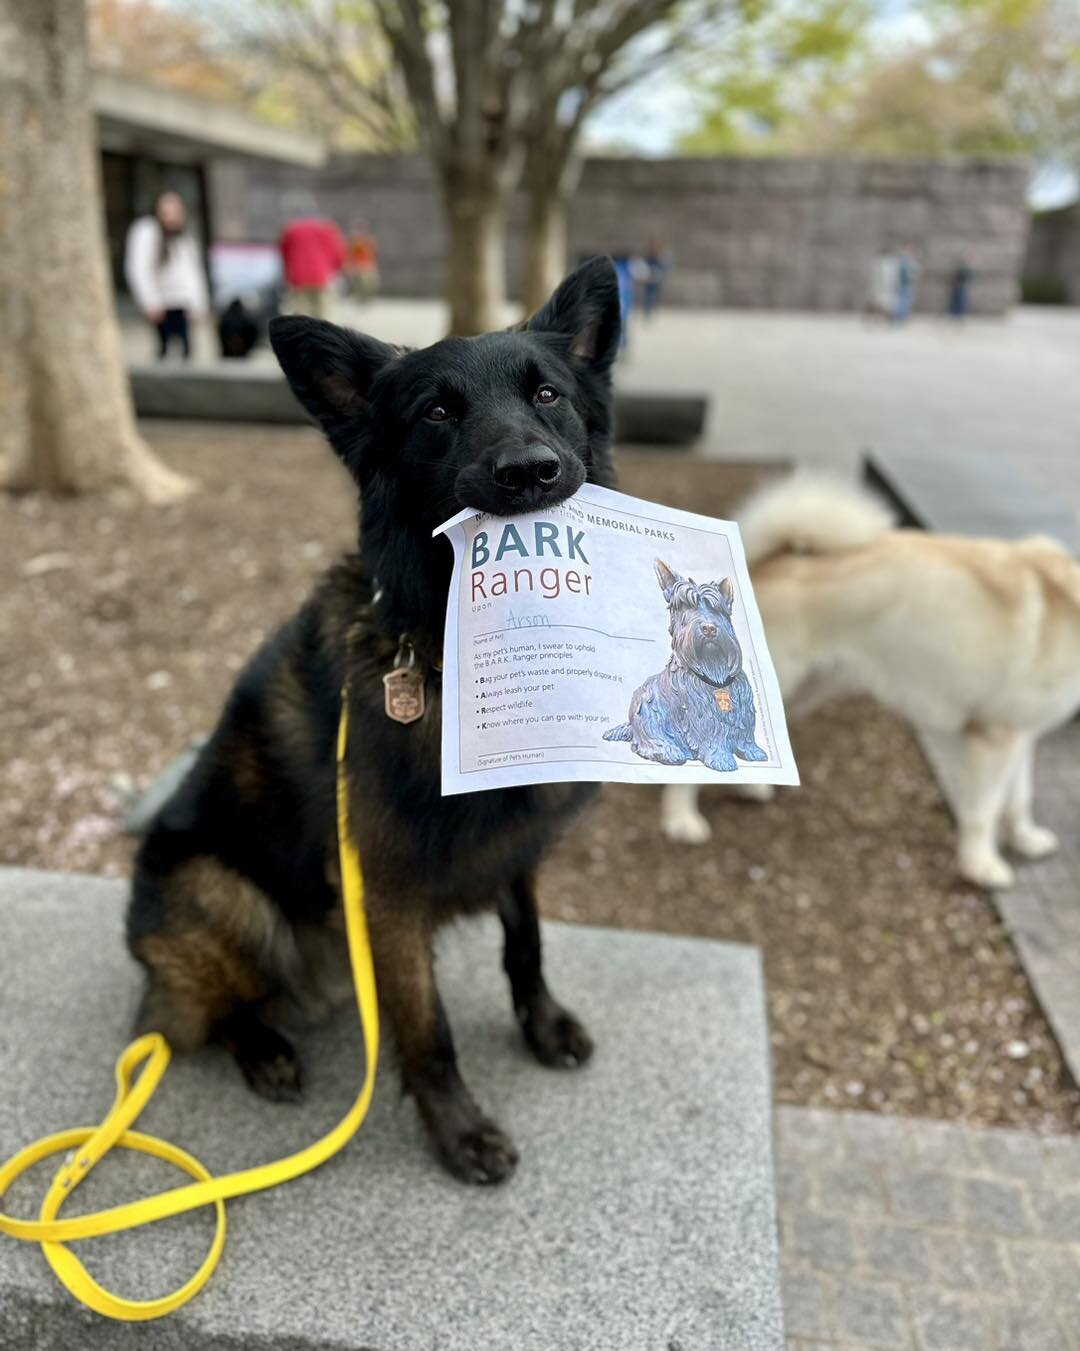 Arson worked very hard learning about FDR during his tour yesterday! And because he was such a good boy he got his official Bark Ranger Certificate and collar tag 😁 
This is a program offered at every national park around the US. Some are all year r